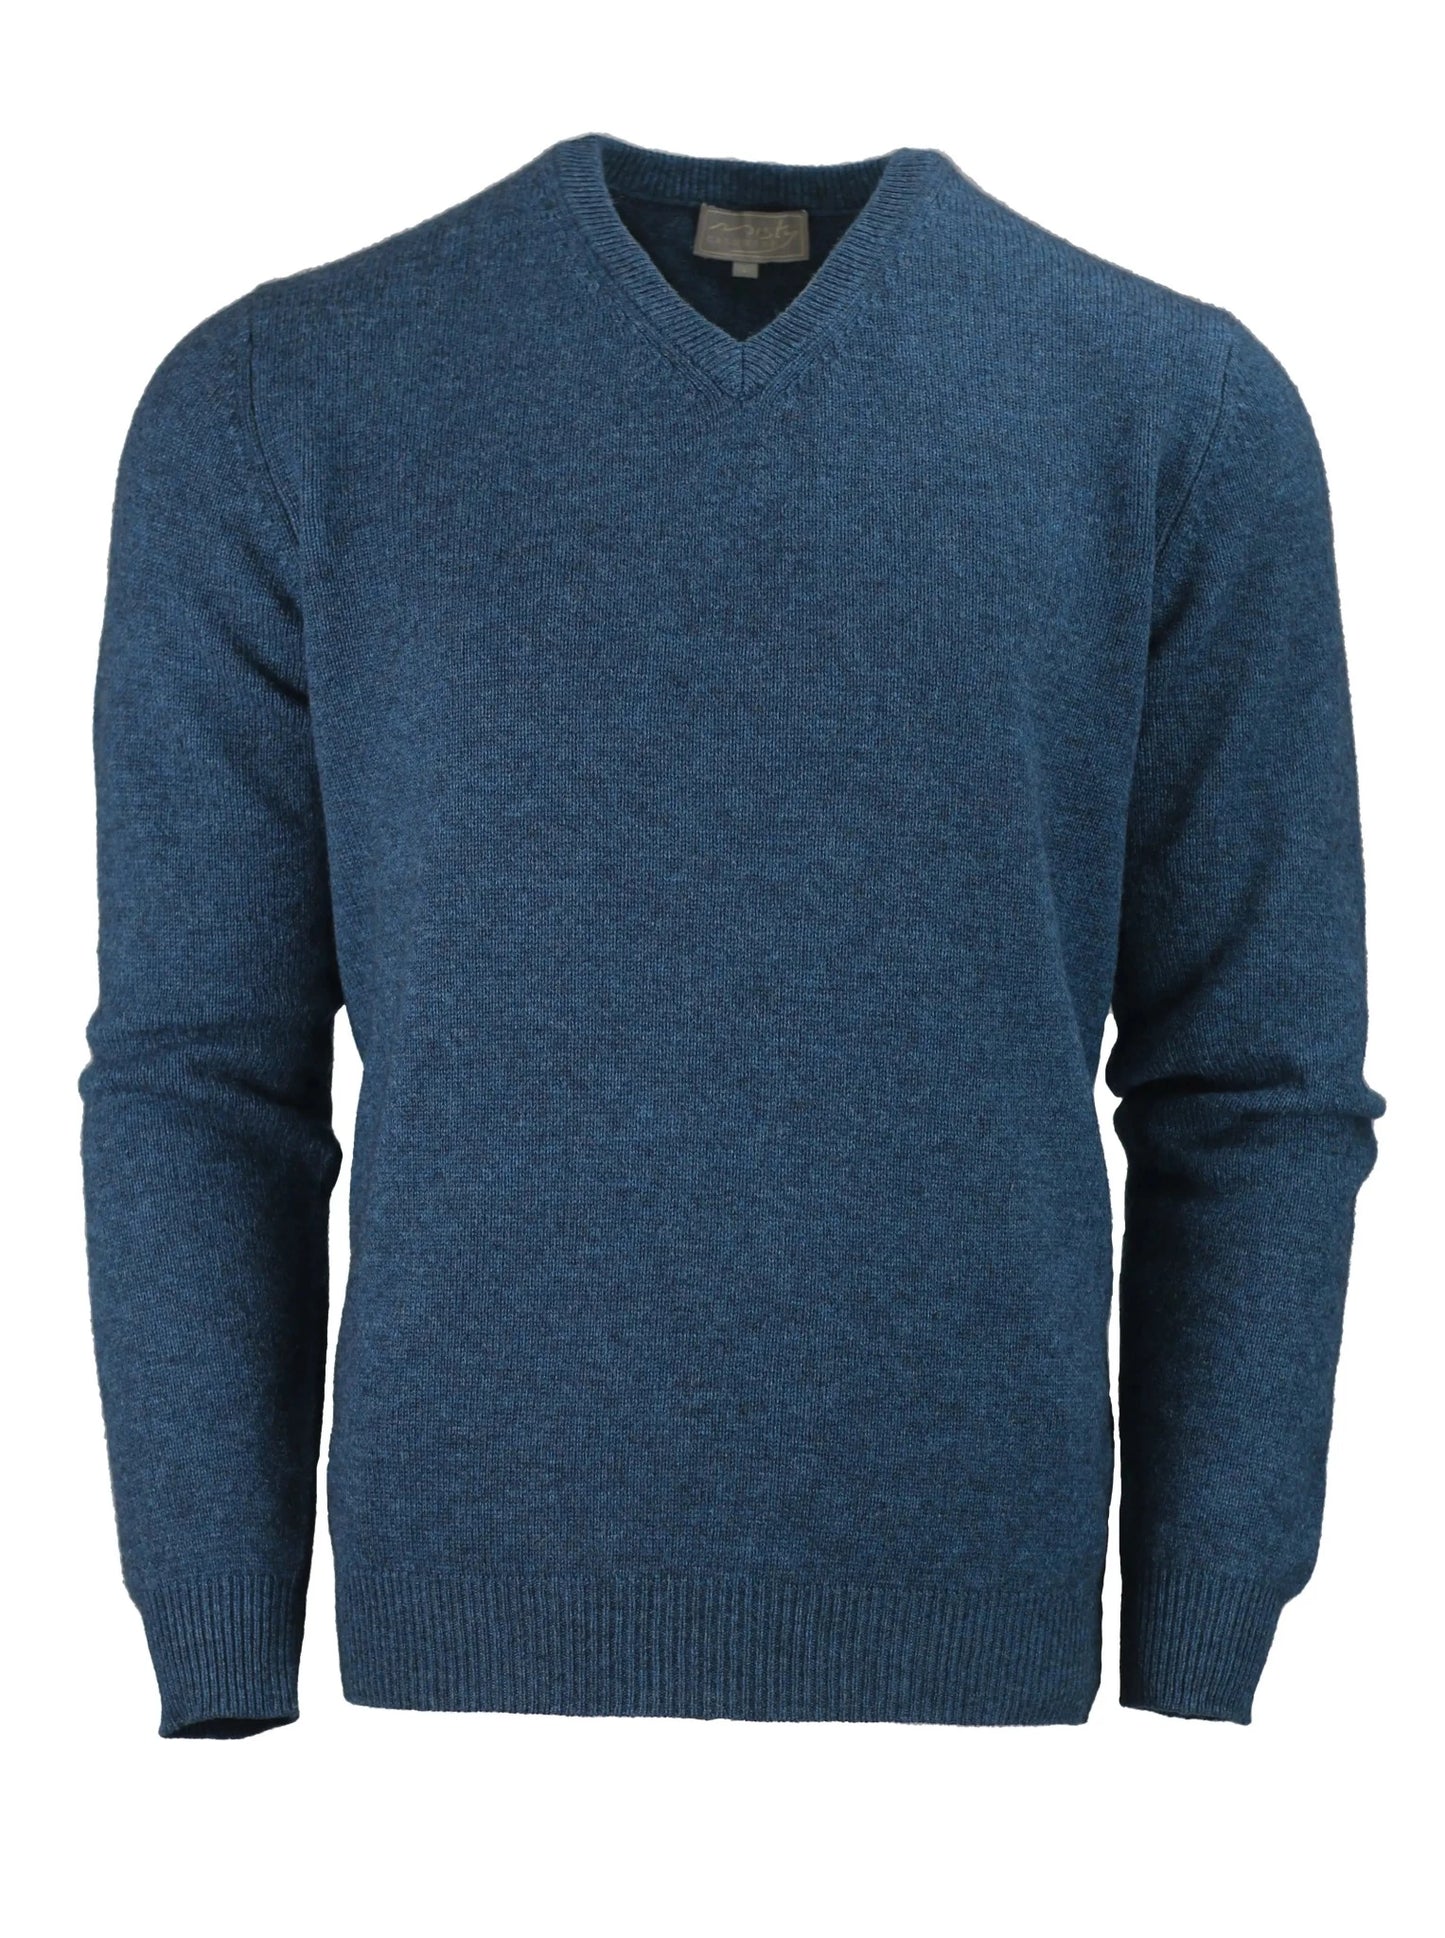 men's v-neck jumper sweater in thick knit cashmere merino ocean blue by Misty Cashmere